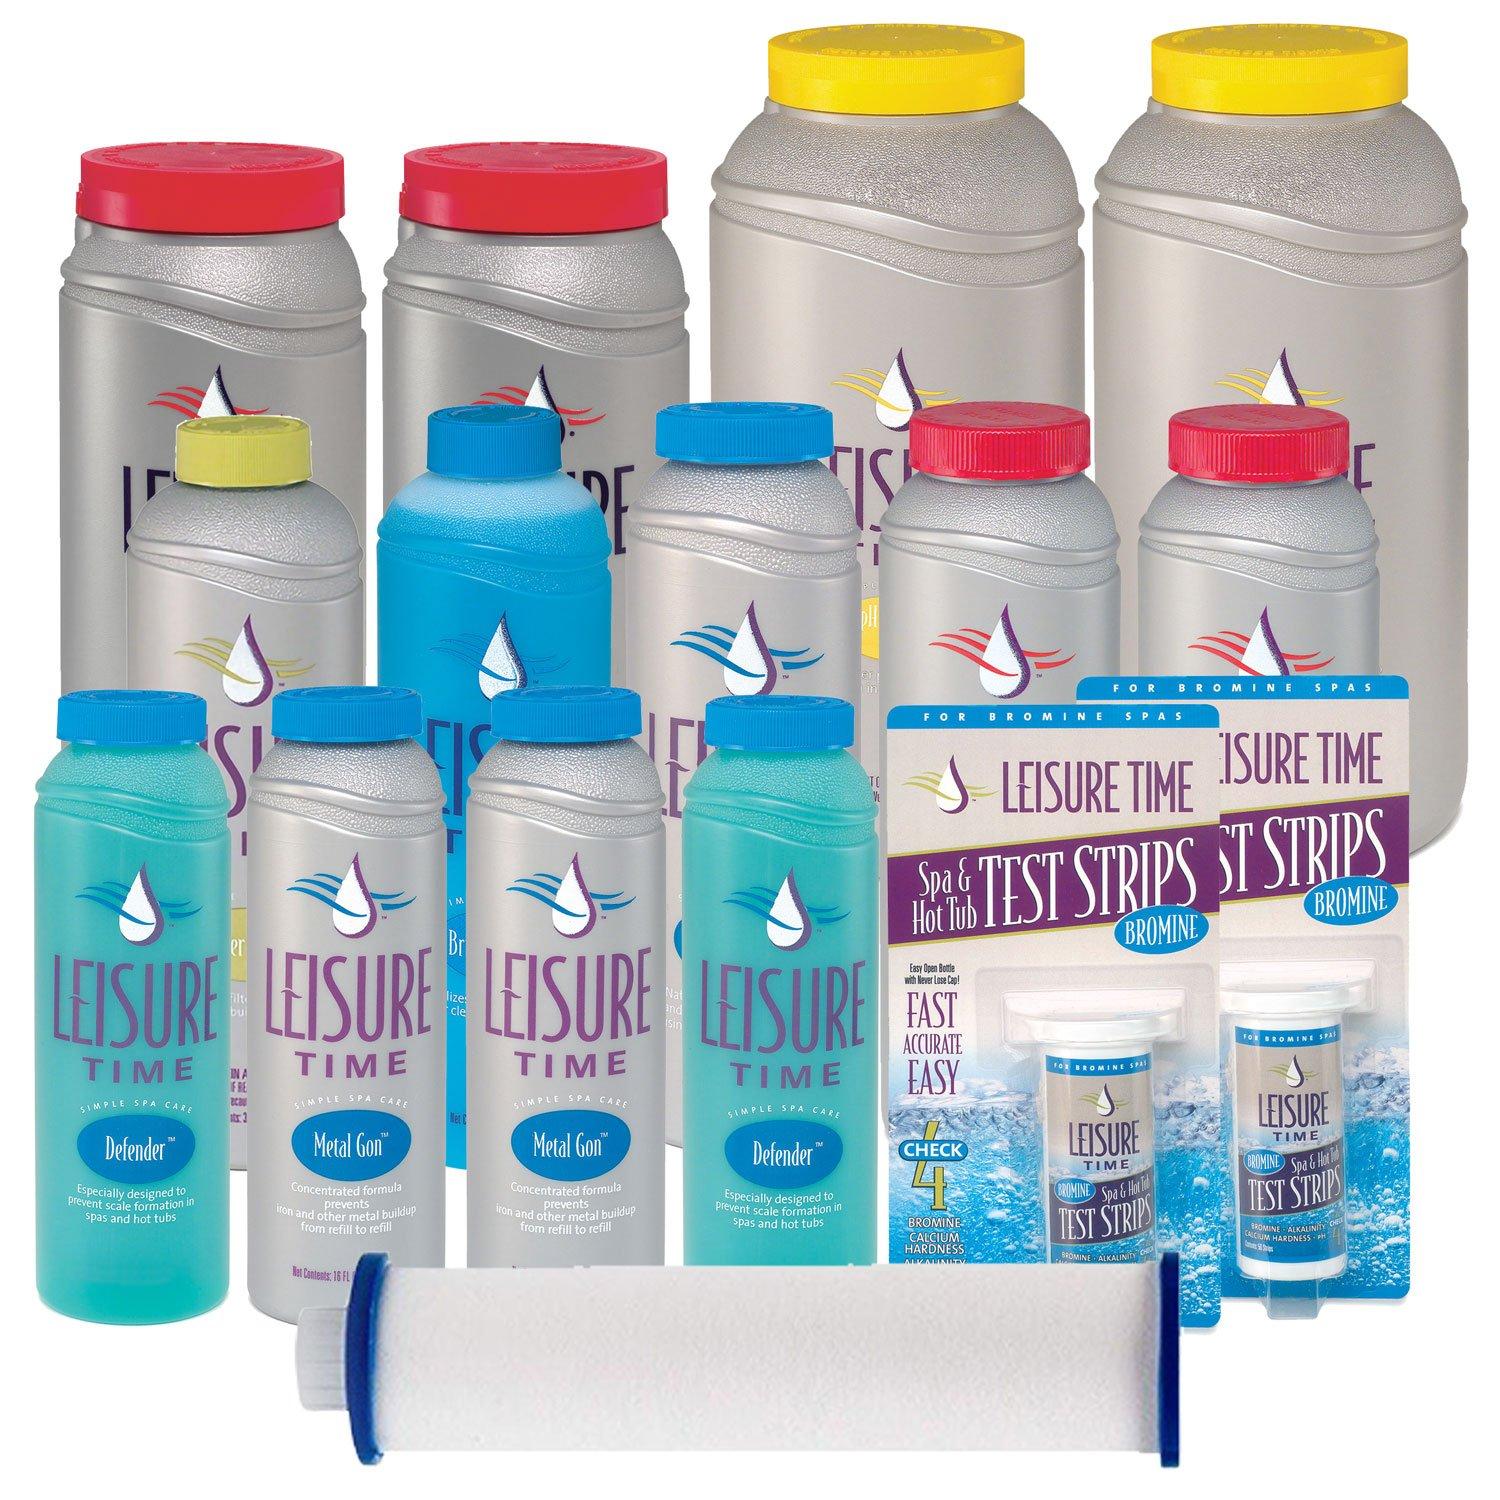 Leisure Time 6 Month Bromine Kit-hard Water